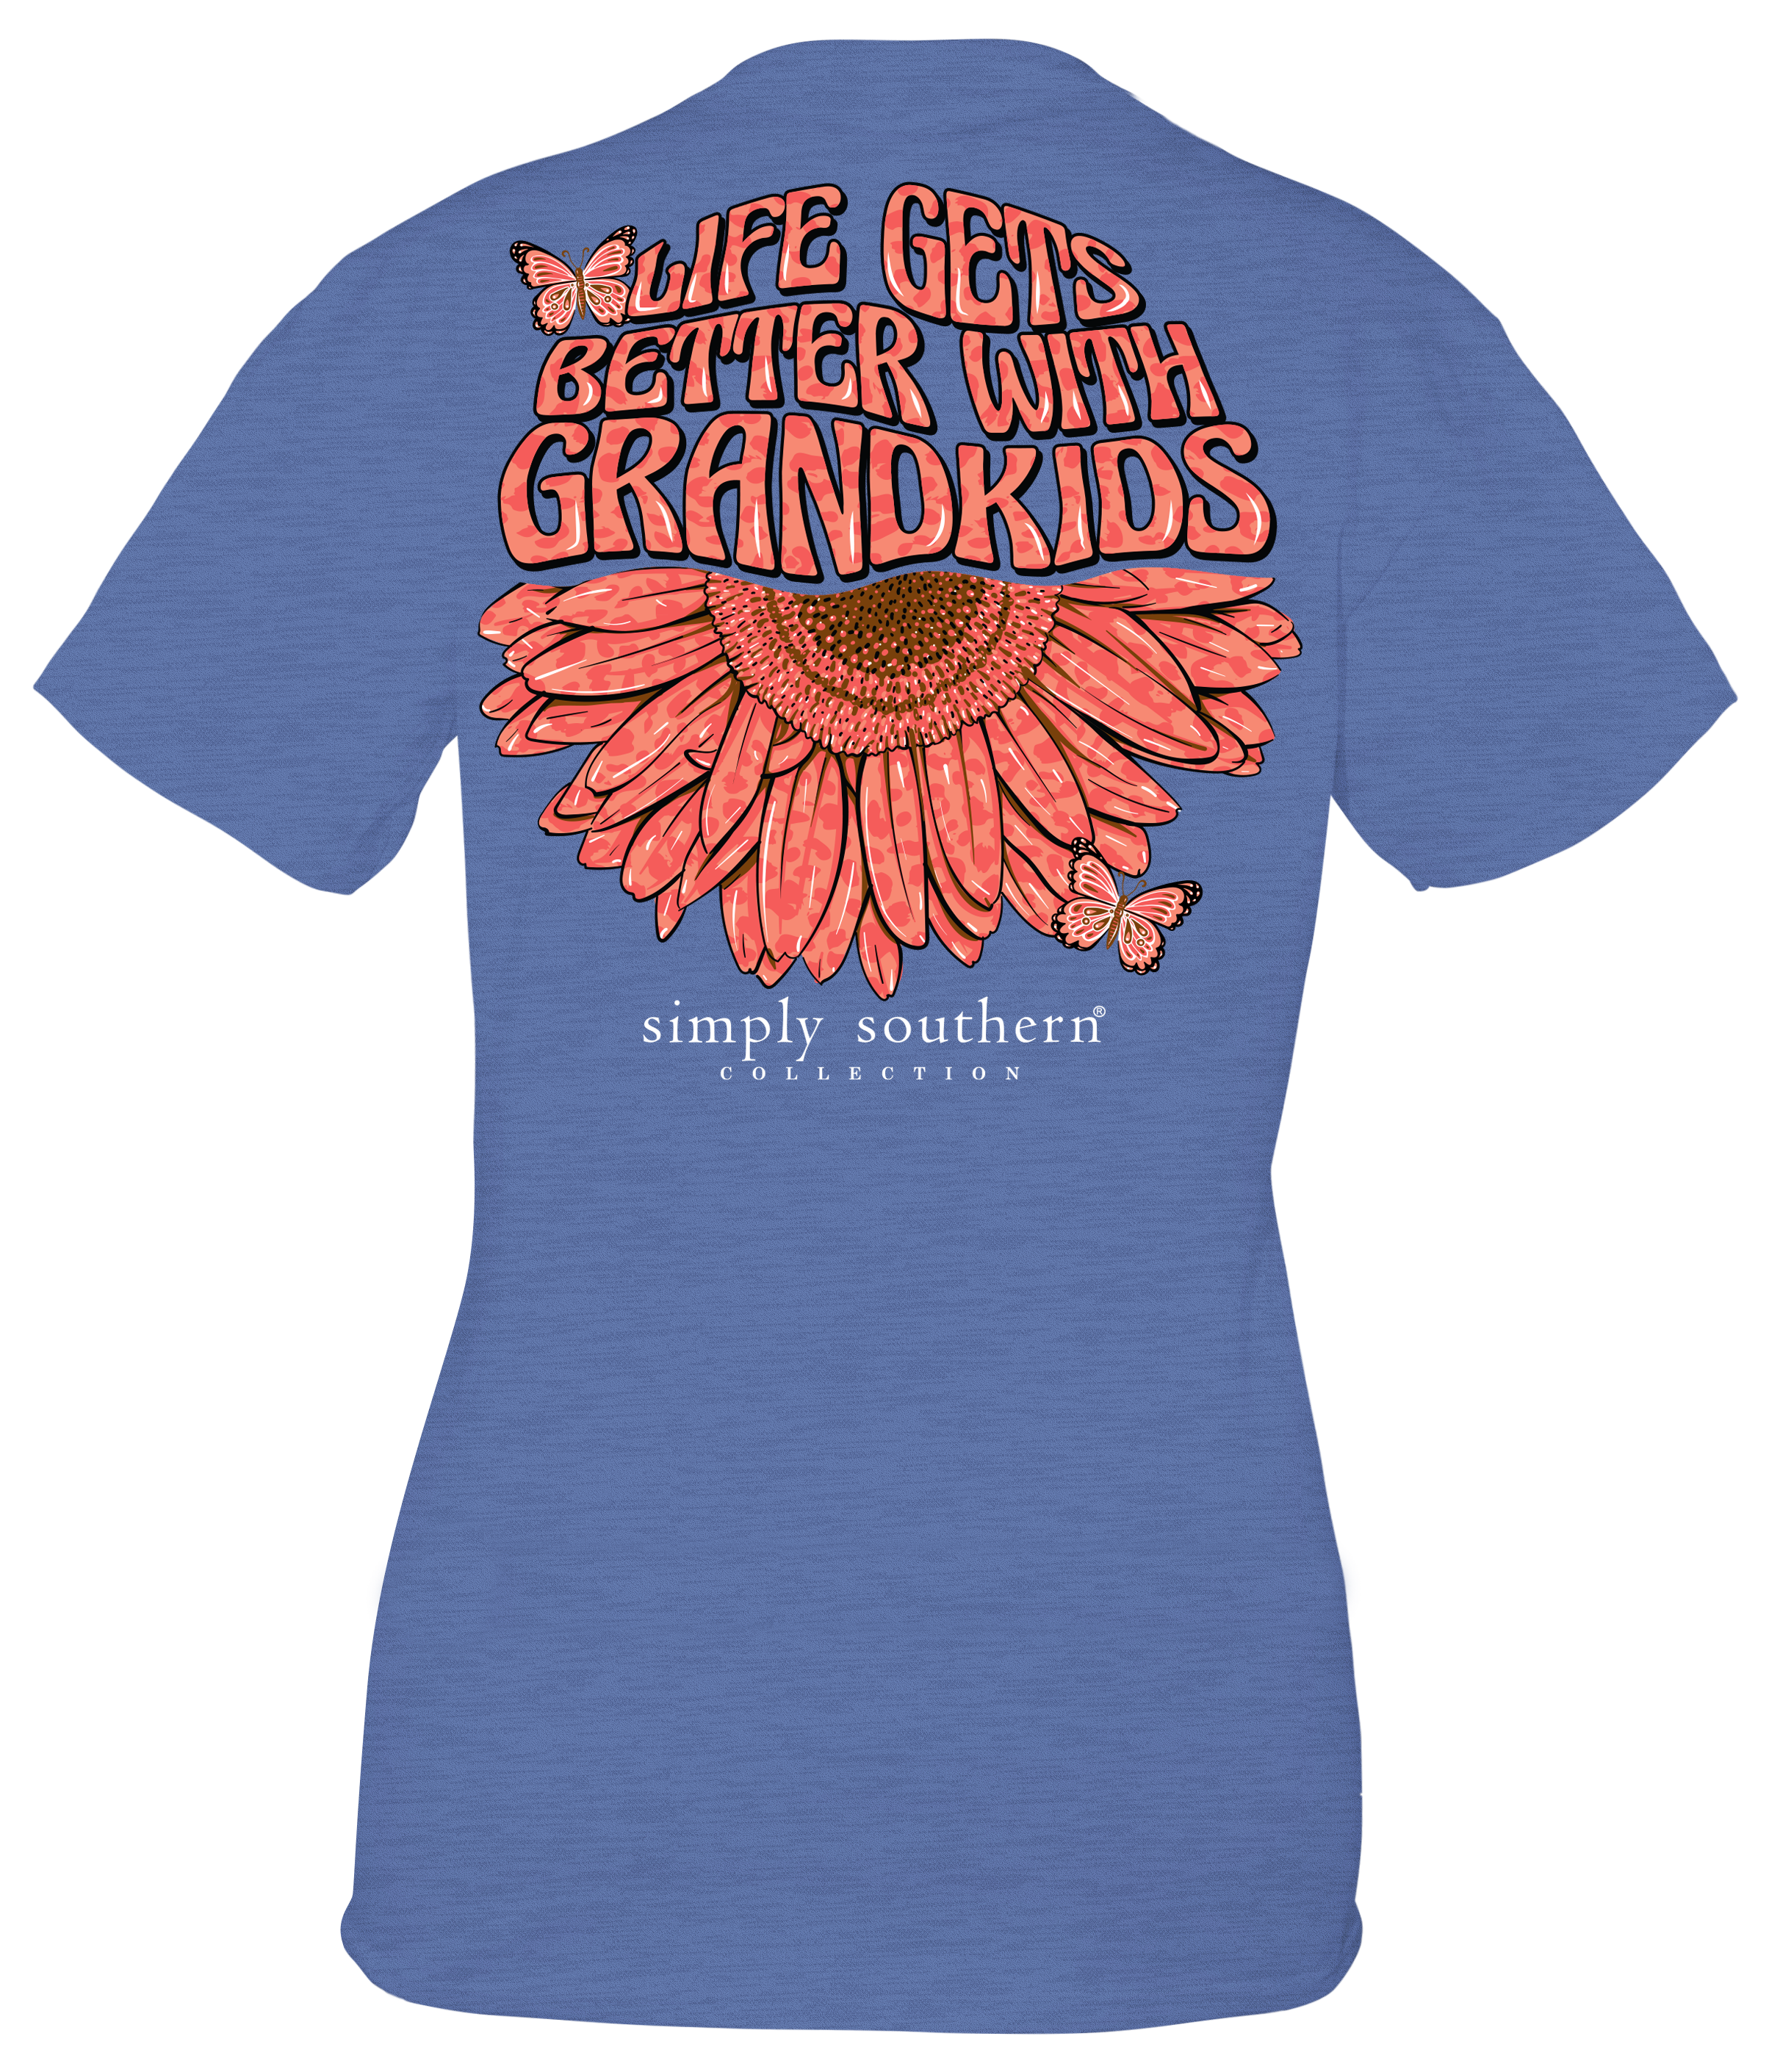 'Life Gets Better With Grandkids' Short Sleeve Tee by Simply Southern